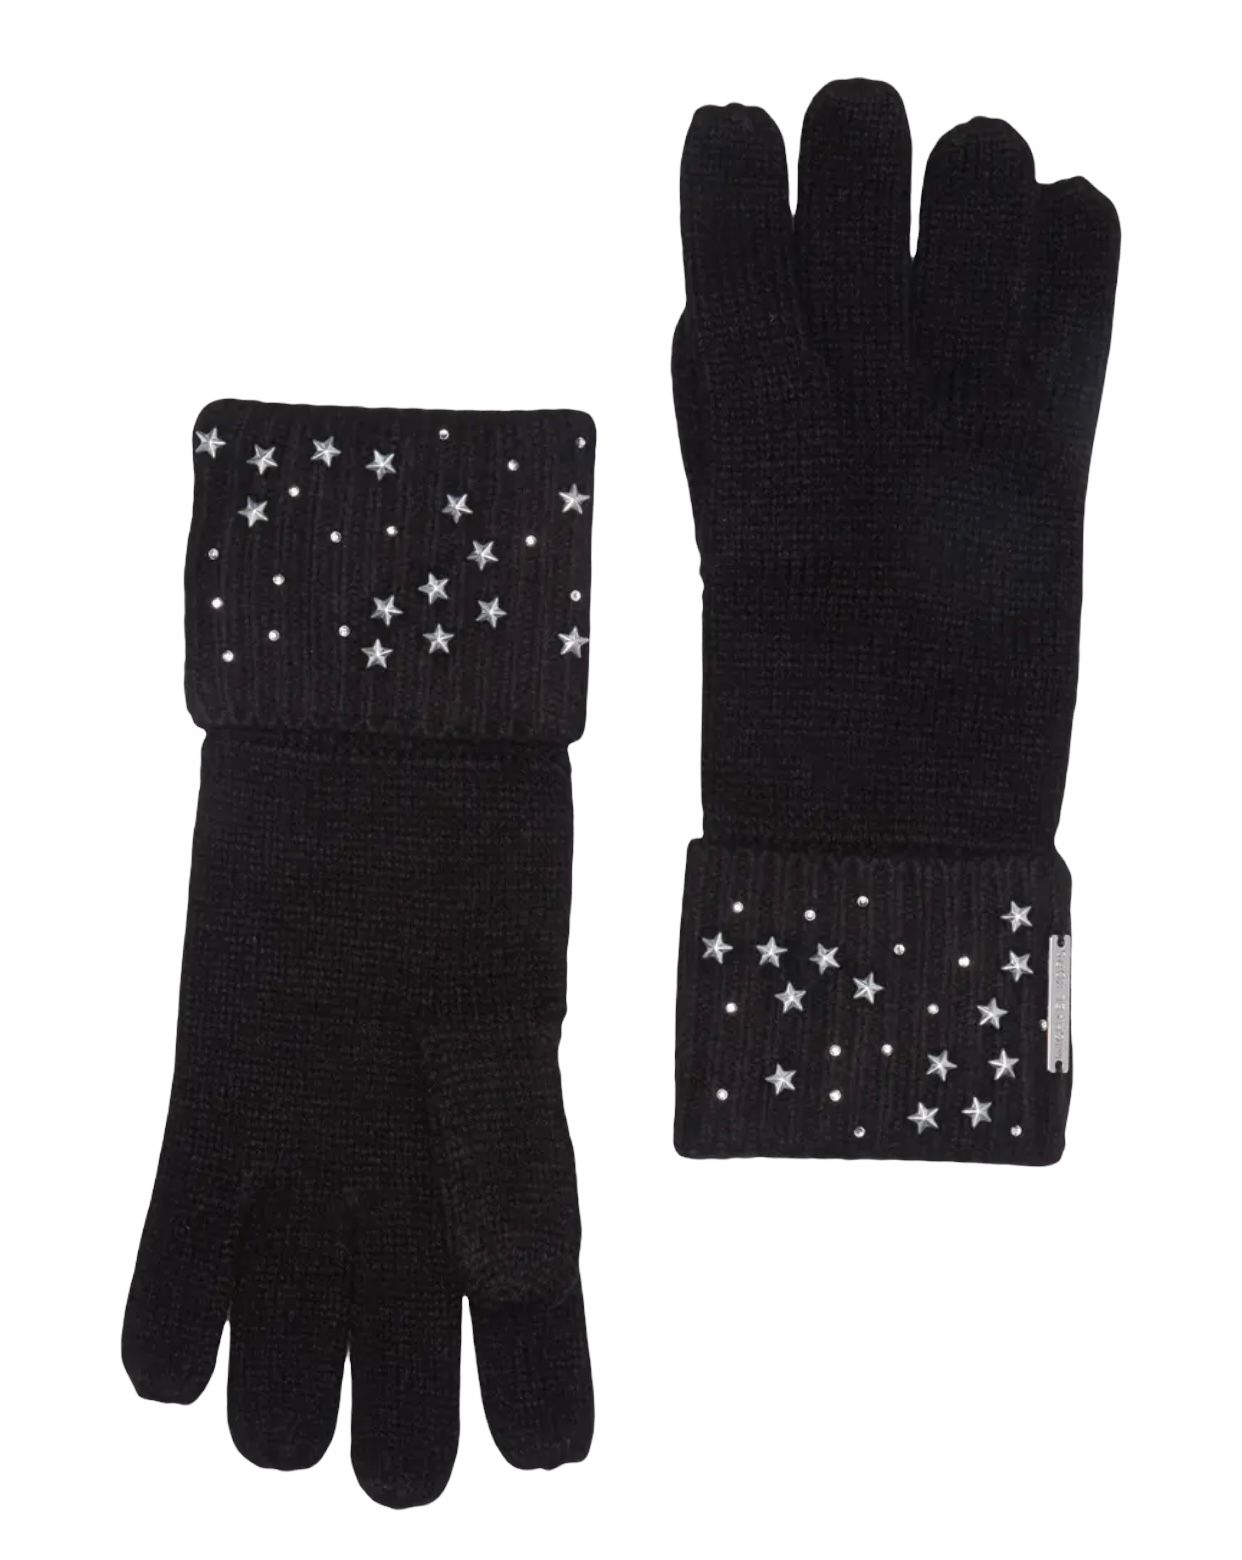 NWT MIchael Kors Access Scattered Star Studded Knit Gloves